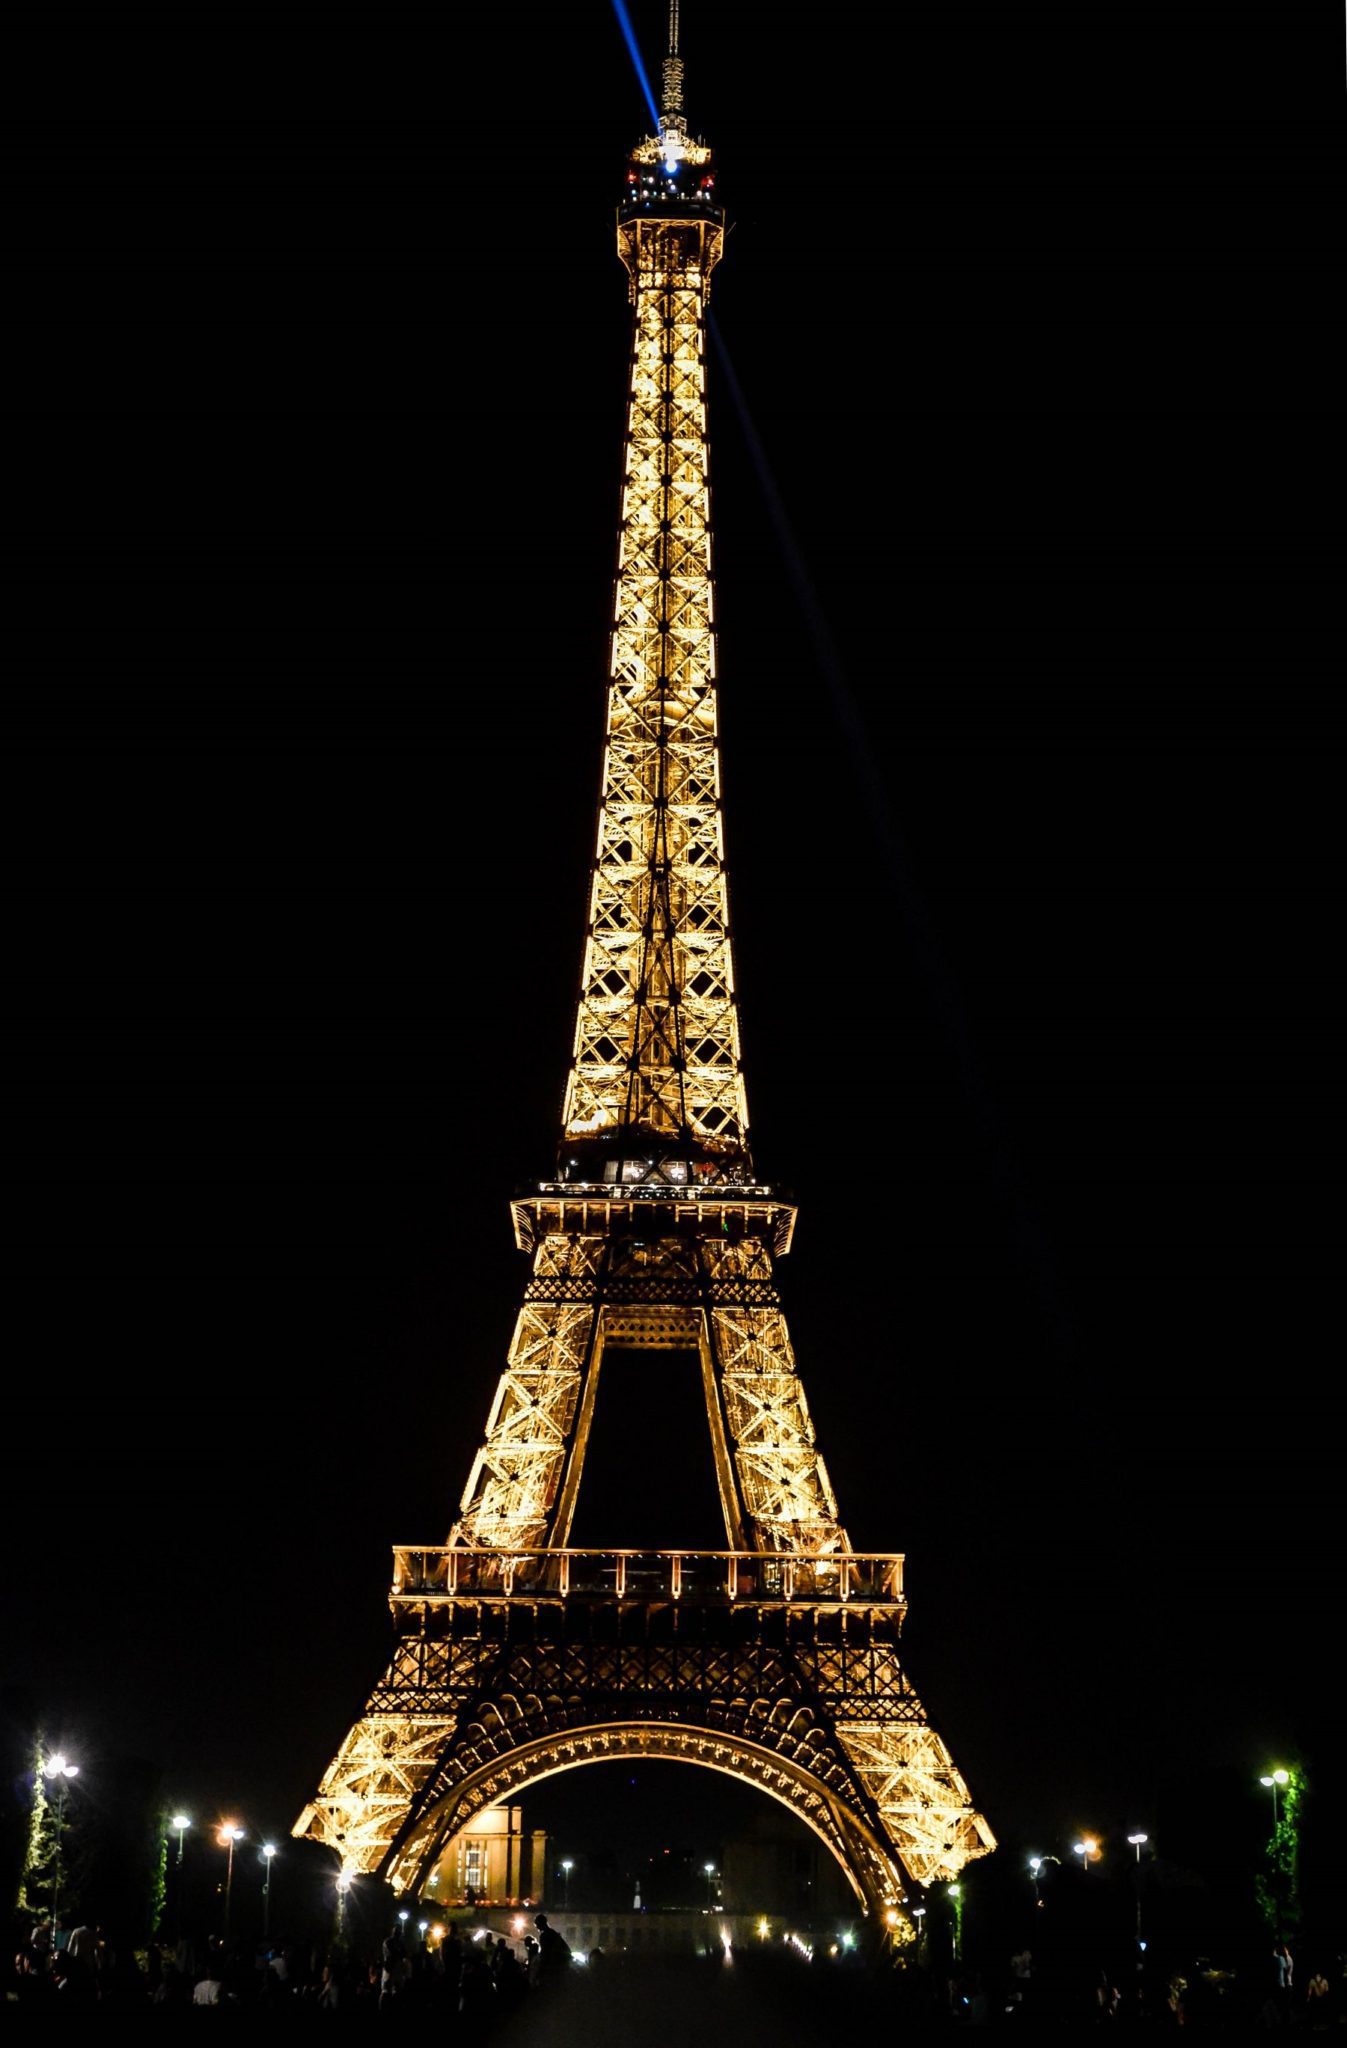 View of the Eiffel tower in Paris at night